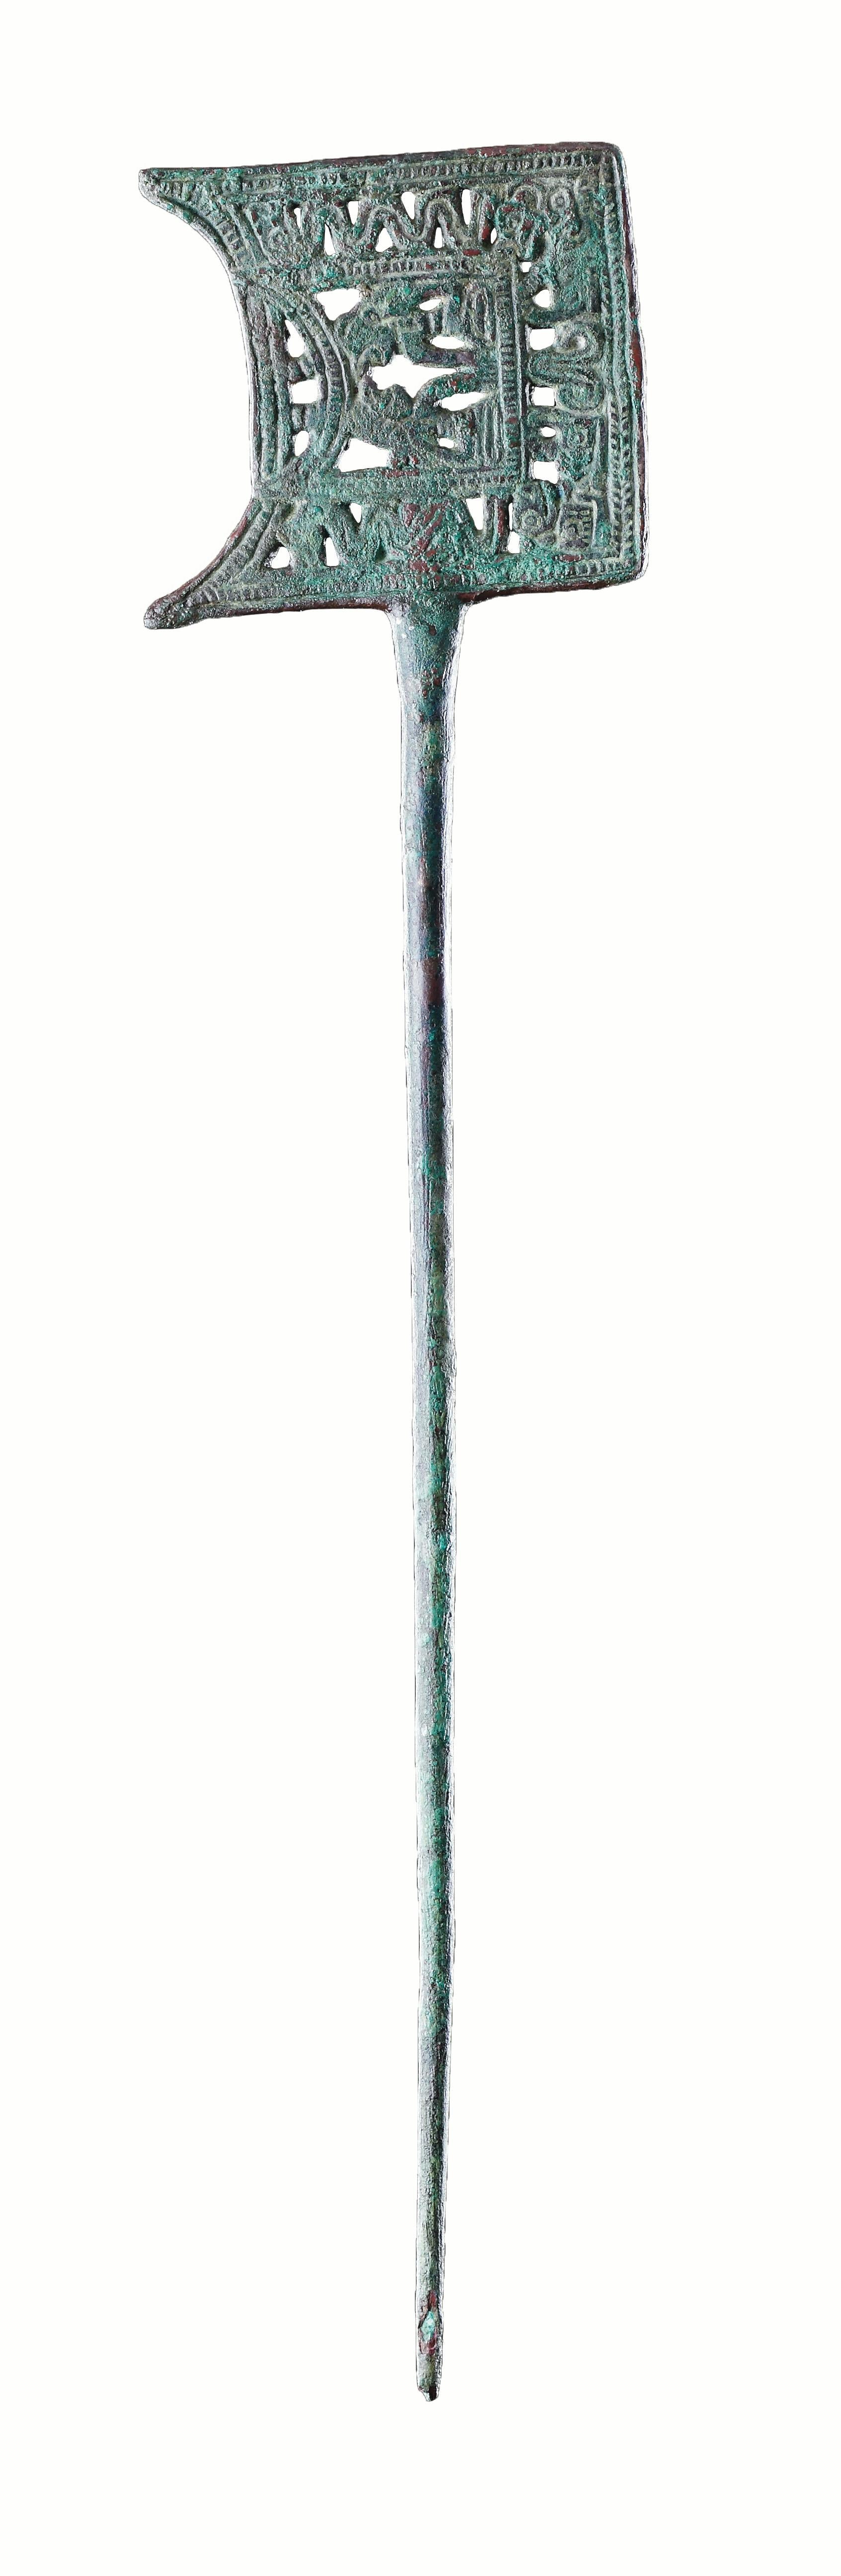 An Openwork Copper Alloy Garment Pin
Superb colour and patina
Bronze
Eastern Iran or Central Asia
2000 BC

SIZE: 35cm wide - 13¾ ins wide

A similar pin in the Louvre-France, was exhibited in the Metropolitan Museum’s ‘Art of the First Cities’